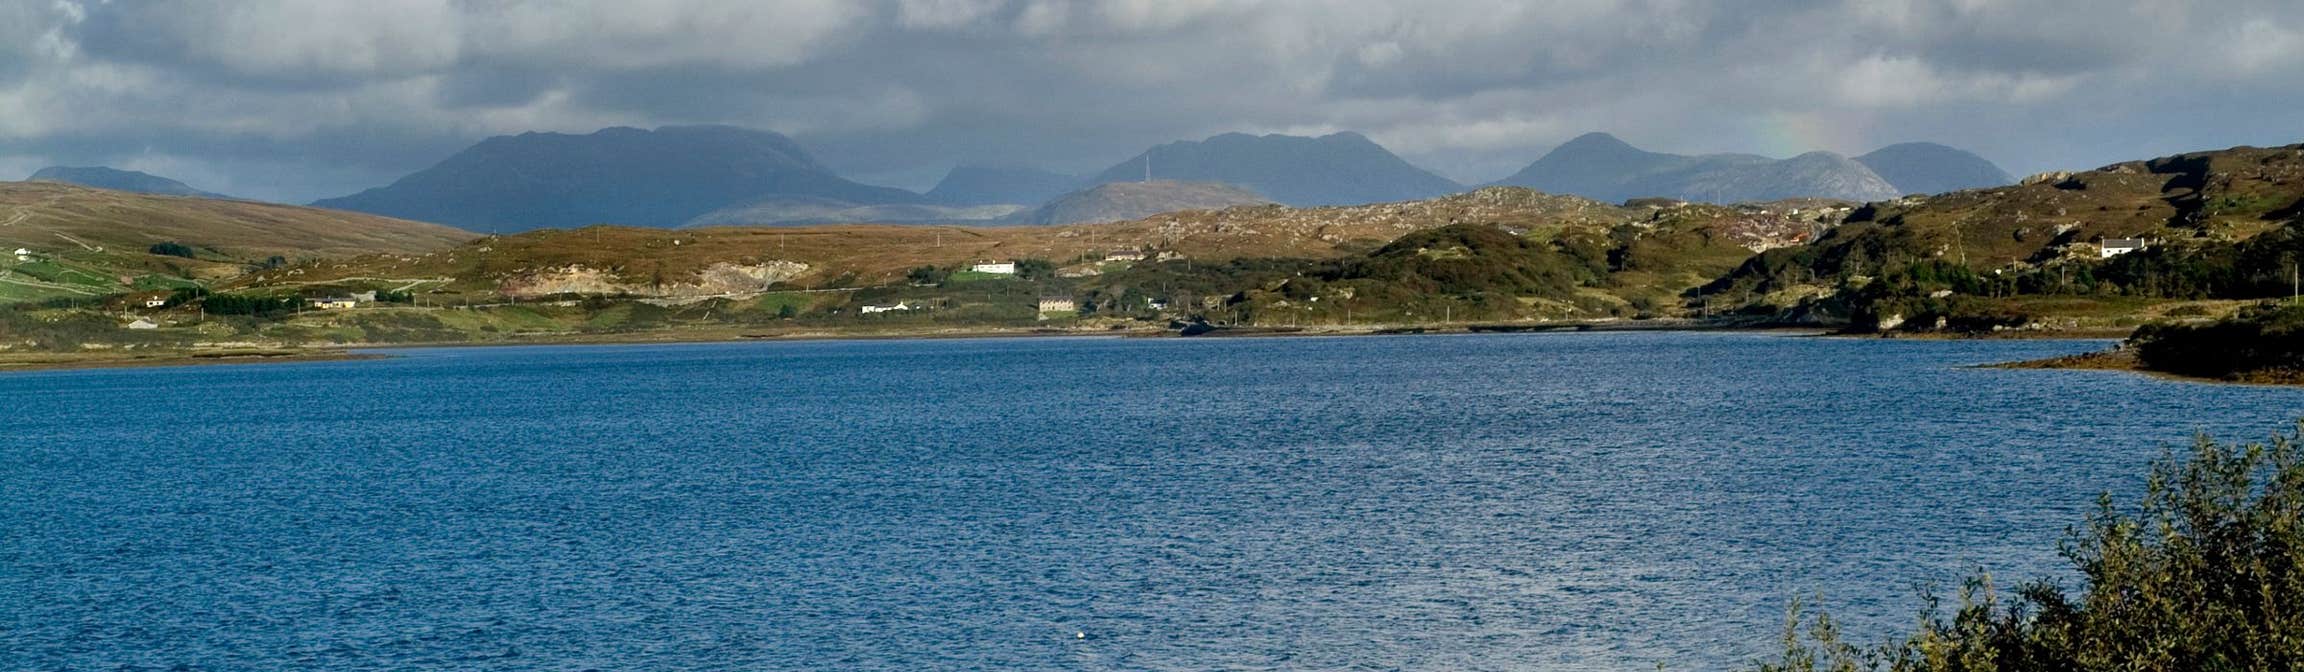 Image of Clifden in County Galway